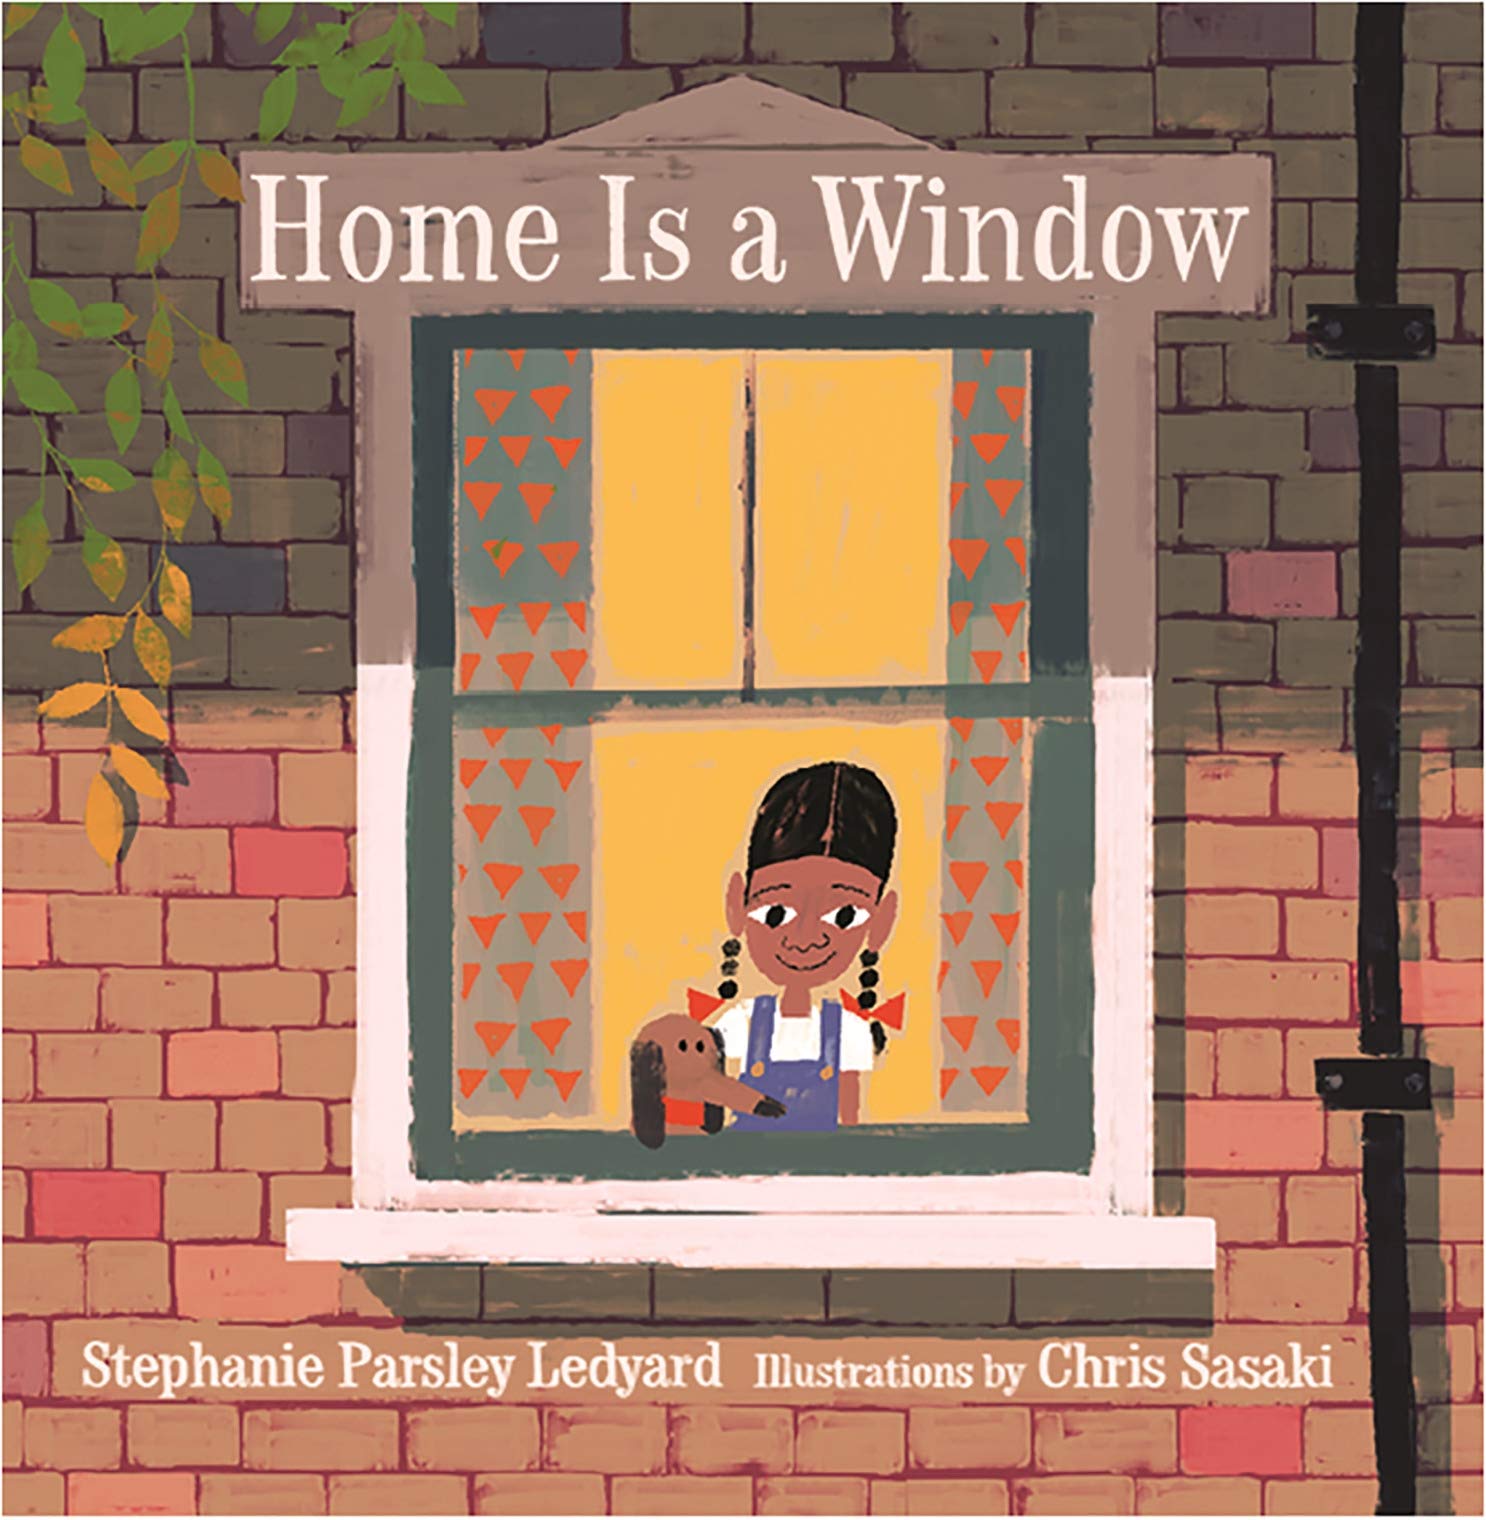 "Home is a Window" book cover